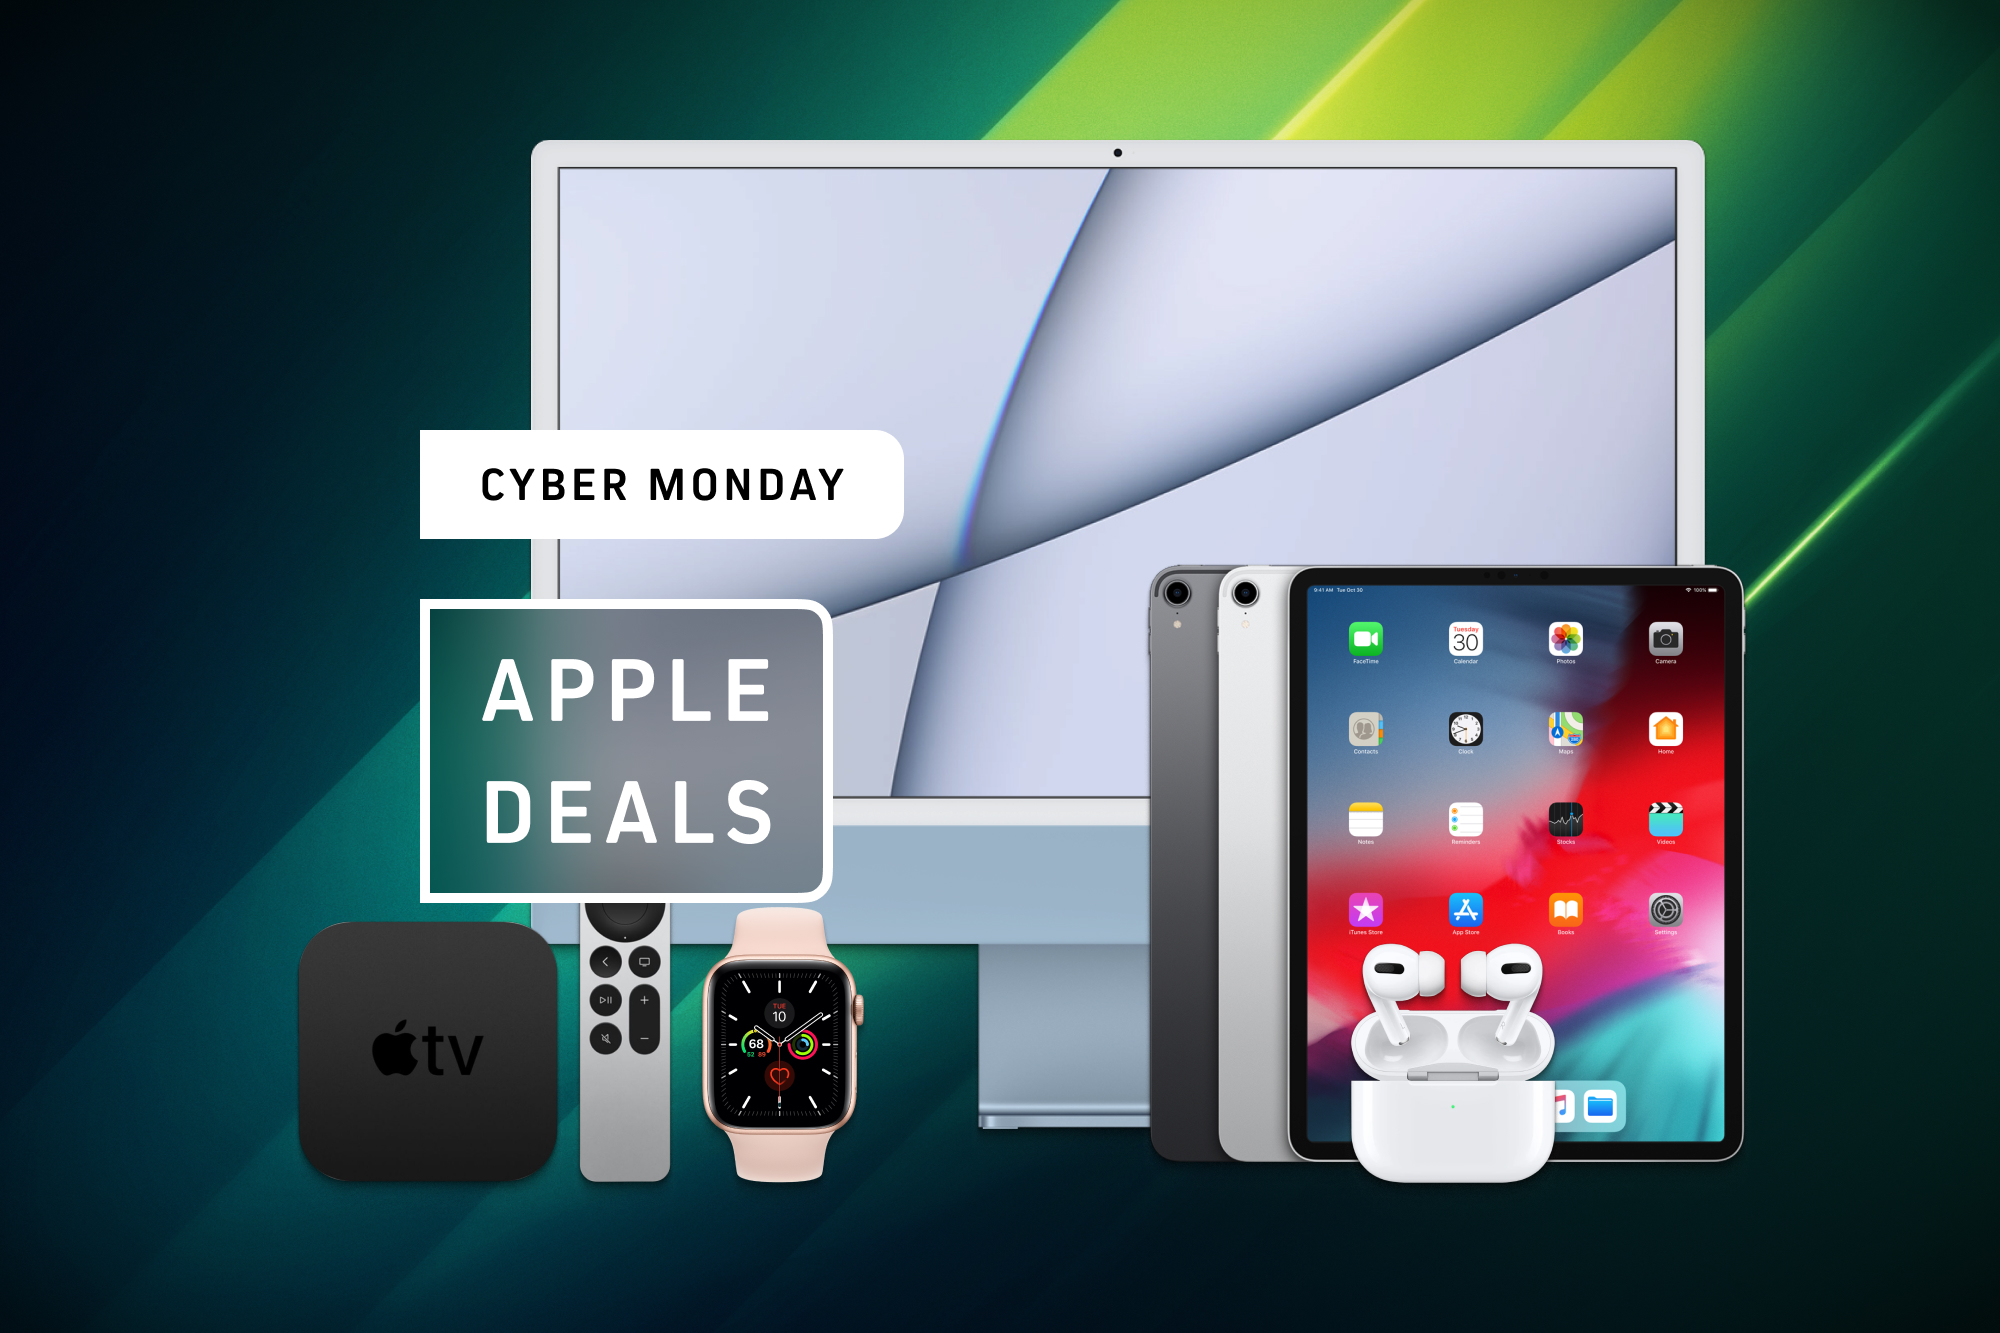 Apple Store hands out $200 gift cards during Black Friday/Cyber Monday sale